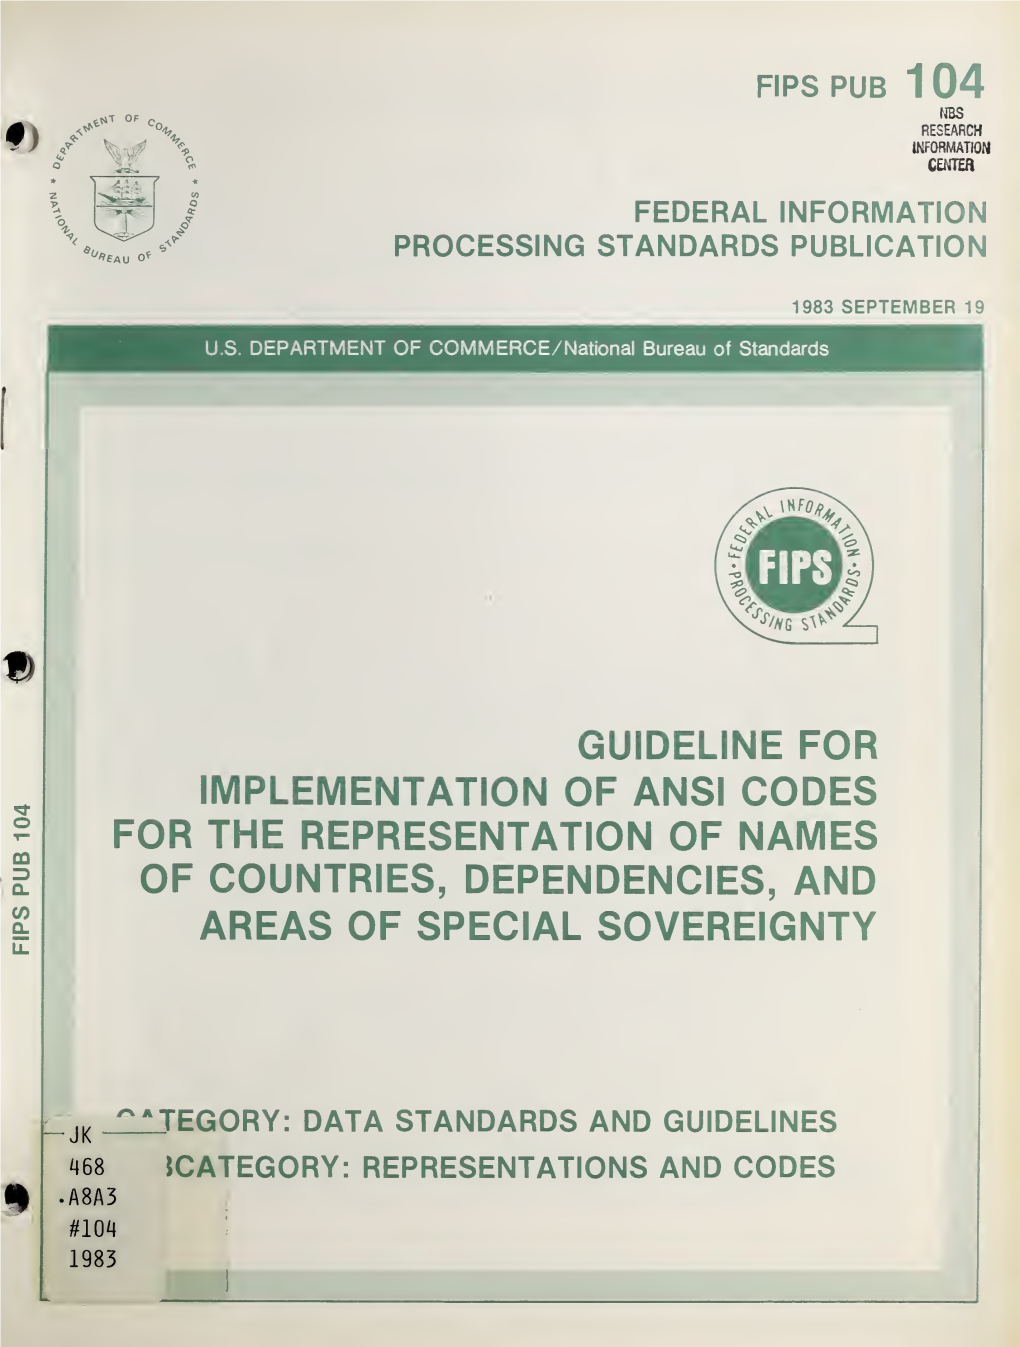 Guideline for Implementation of Ansi Codes for the Representation of Names of Countries, Dependencies, and Areas of Special Sovereignty